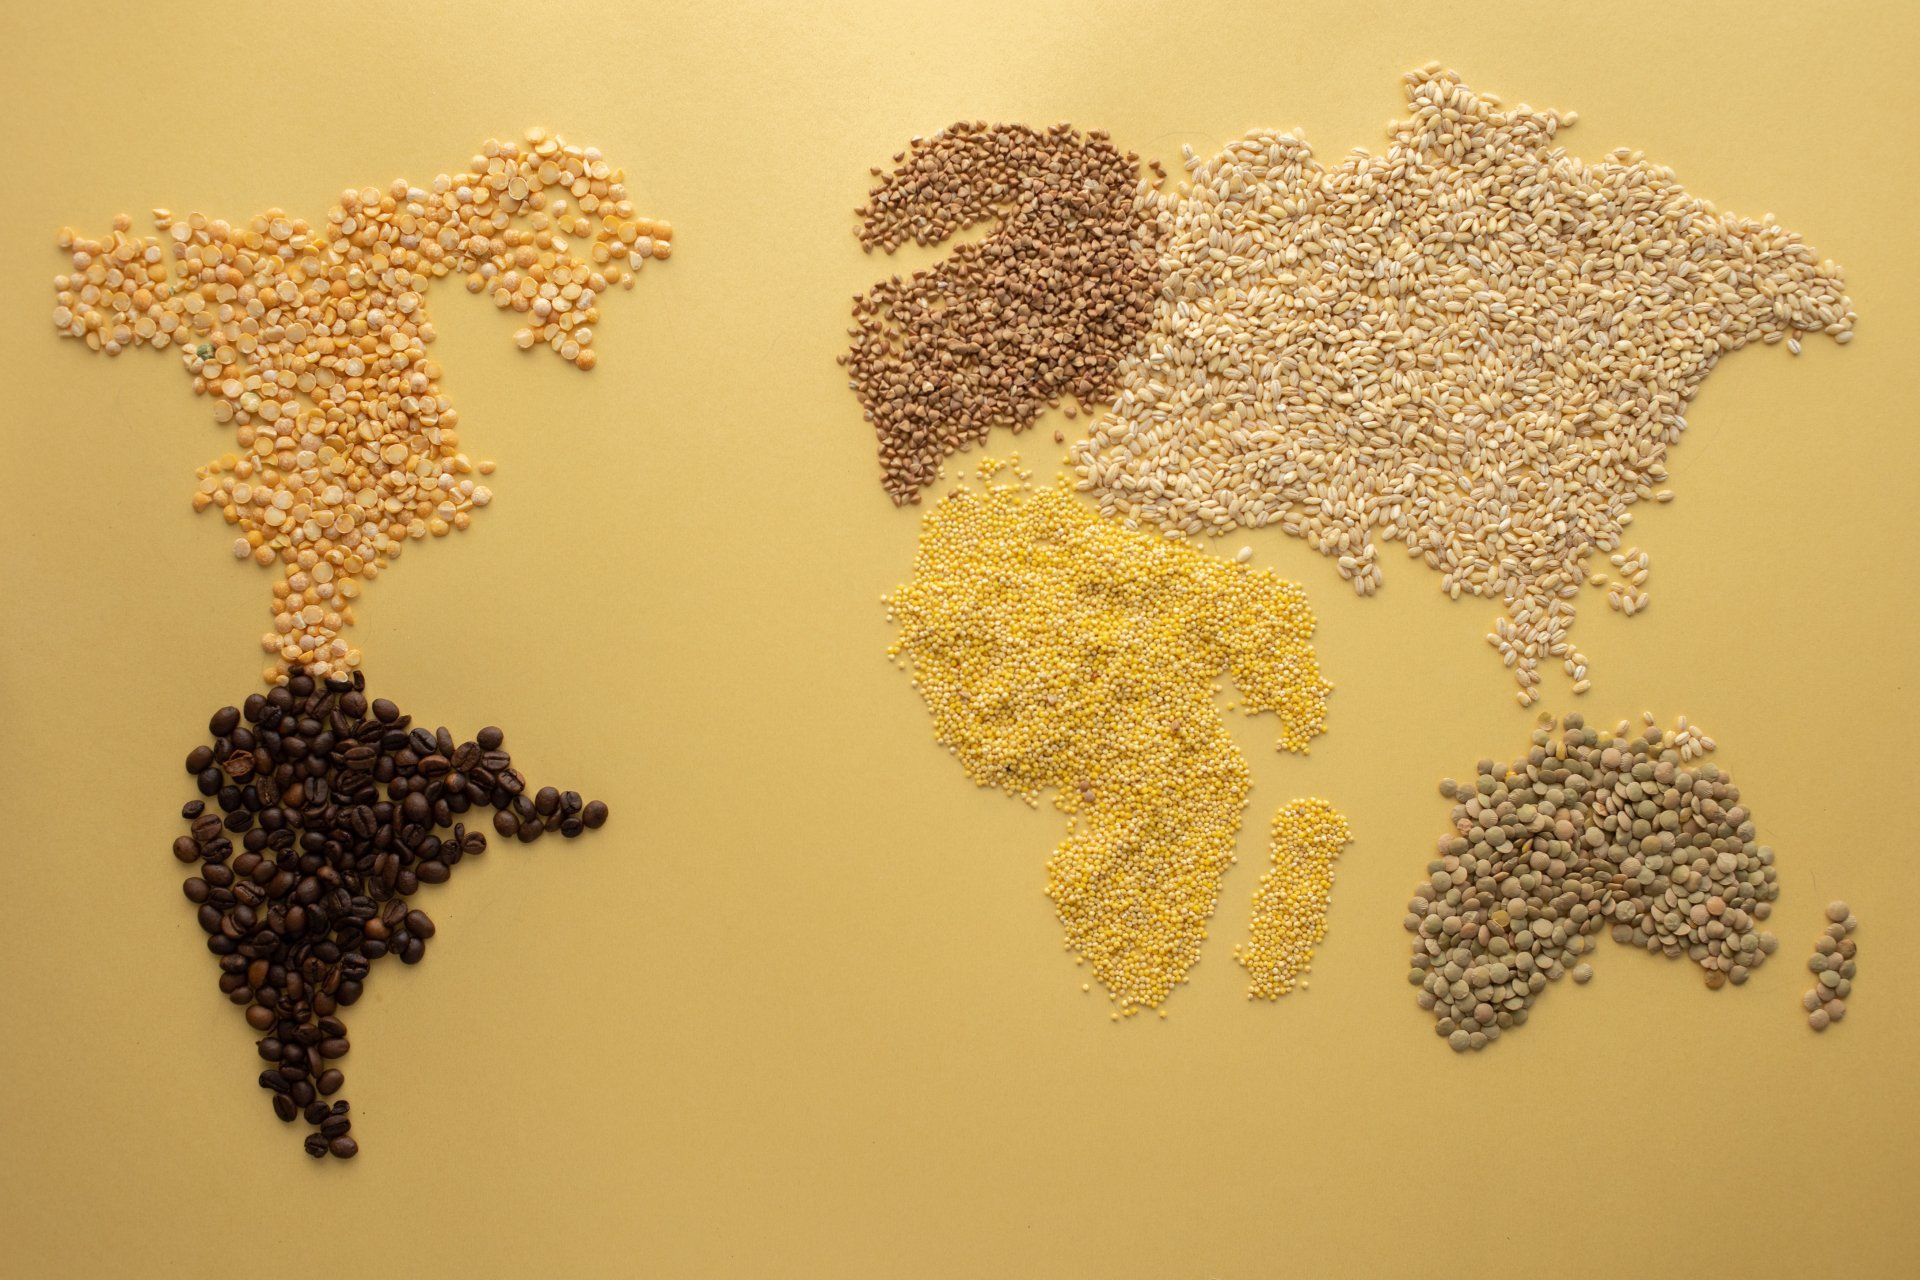 Grains in the shape of the world